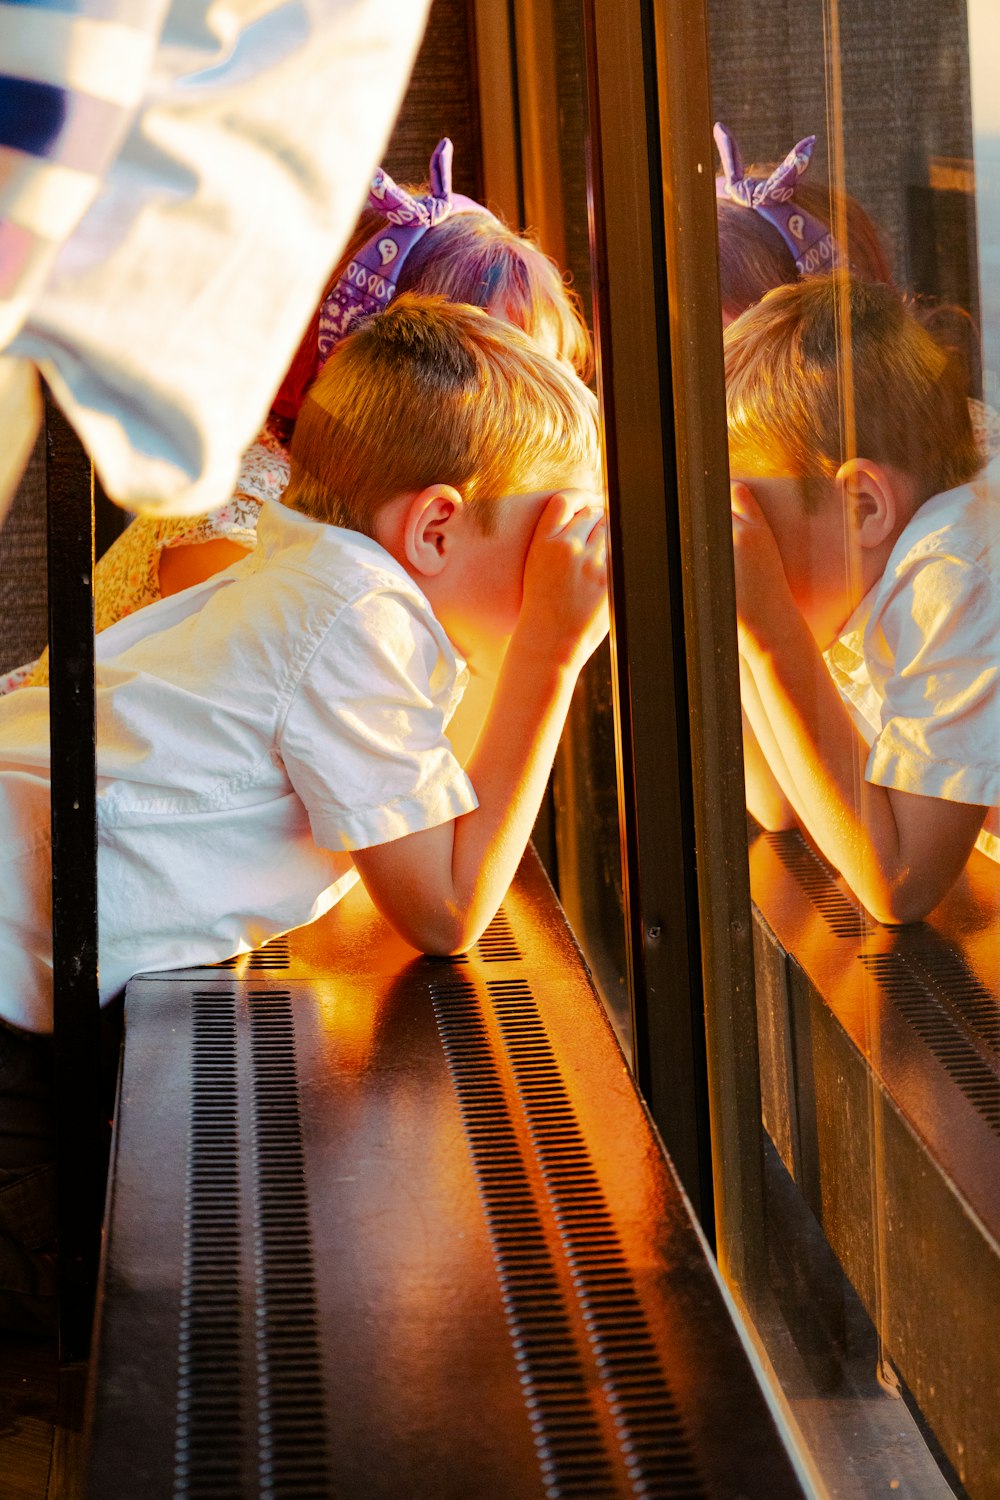 a young boy sitting on a bench next to a window